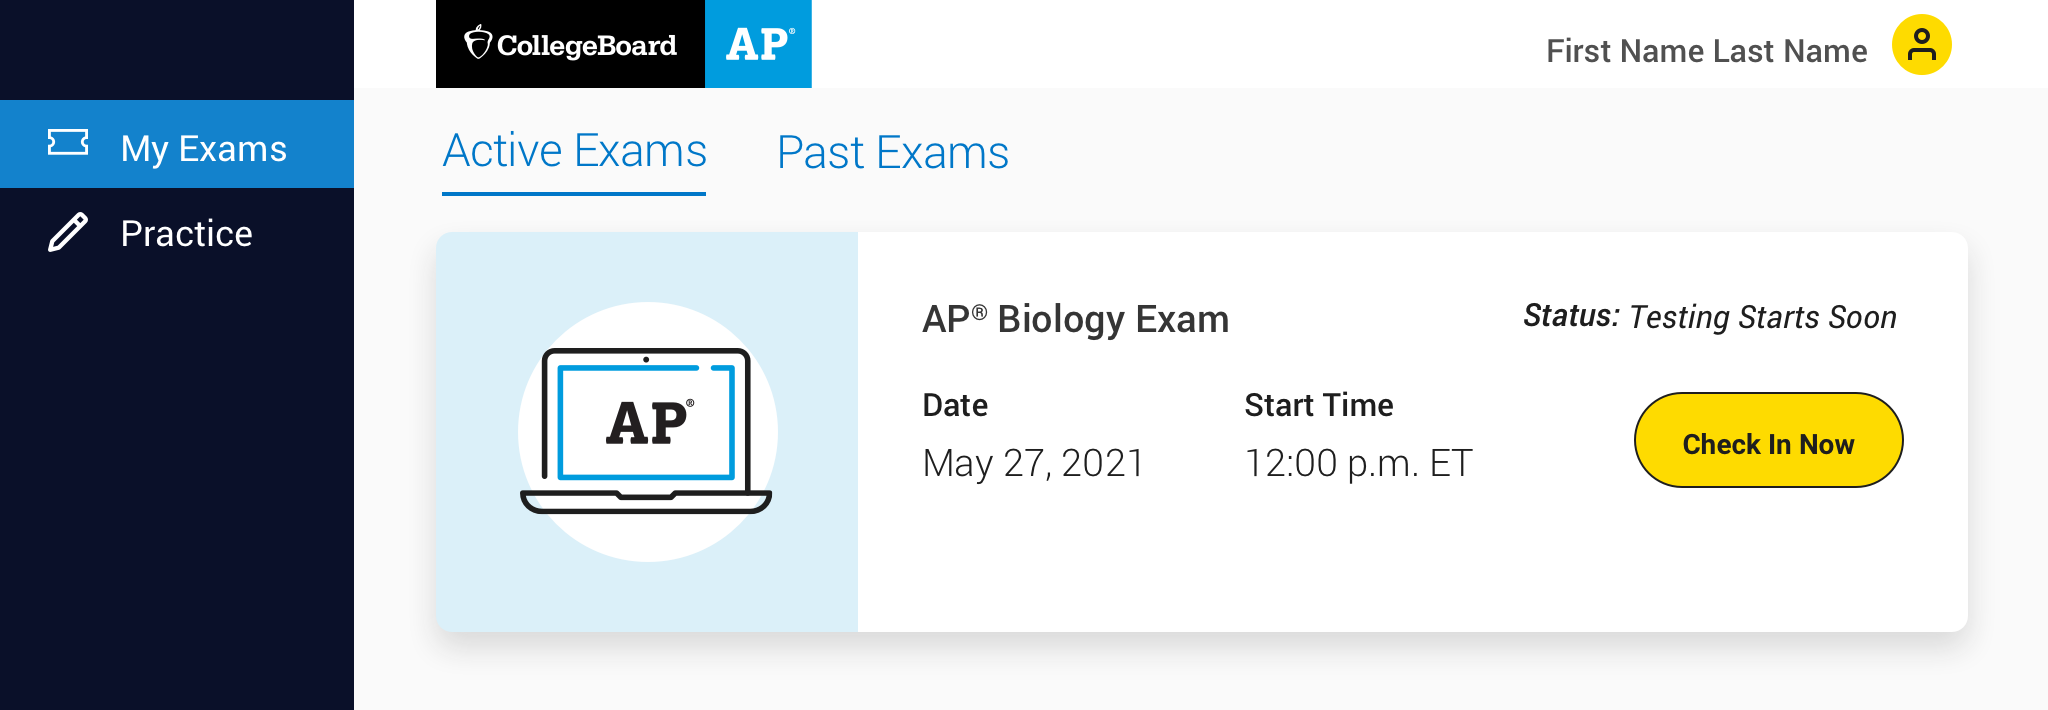 Check in to the 2021 Digital AP Exam AP Students